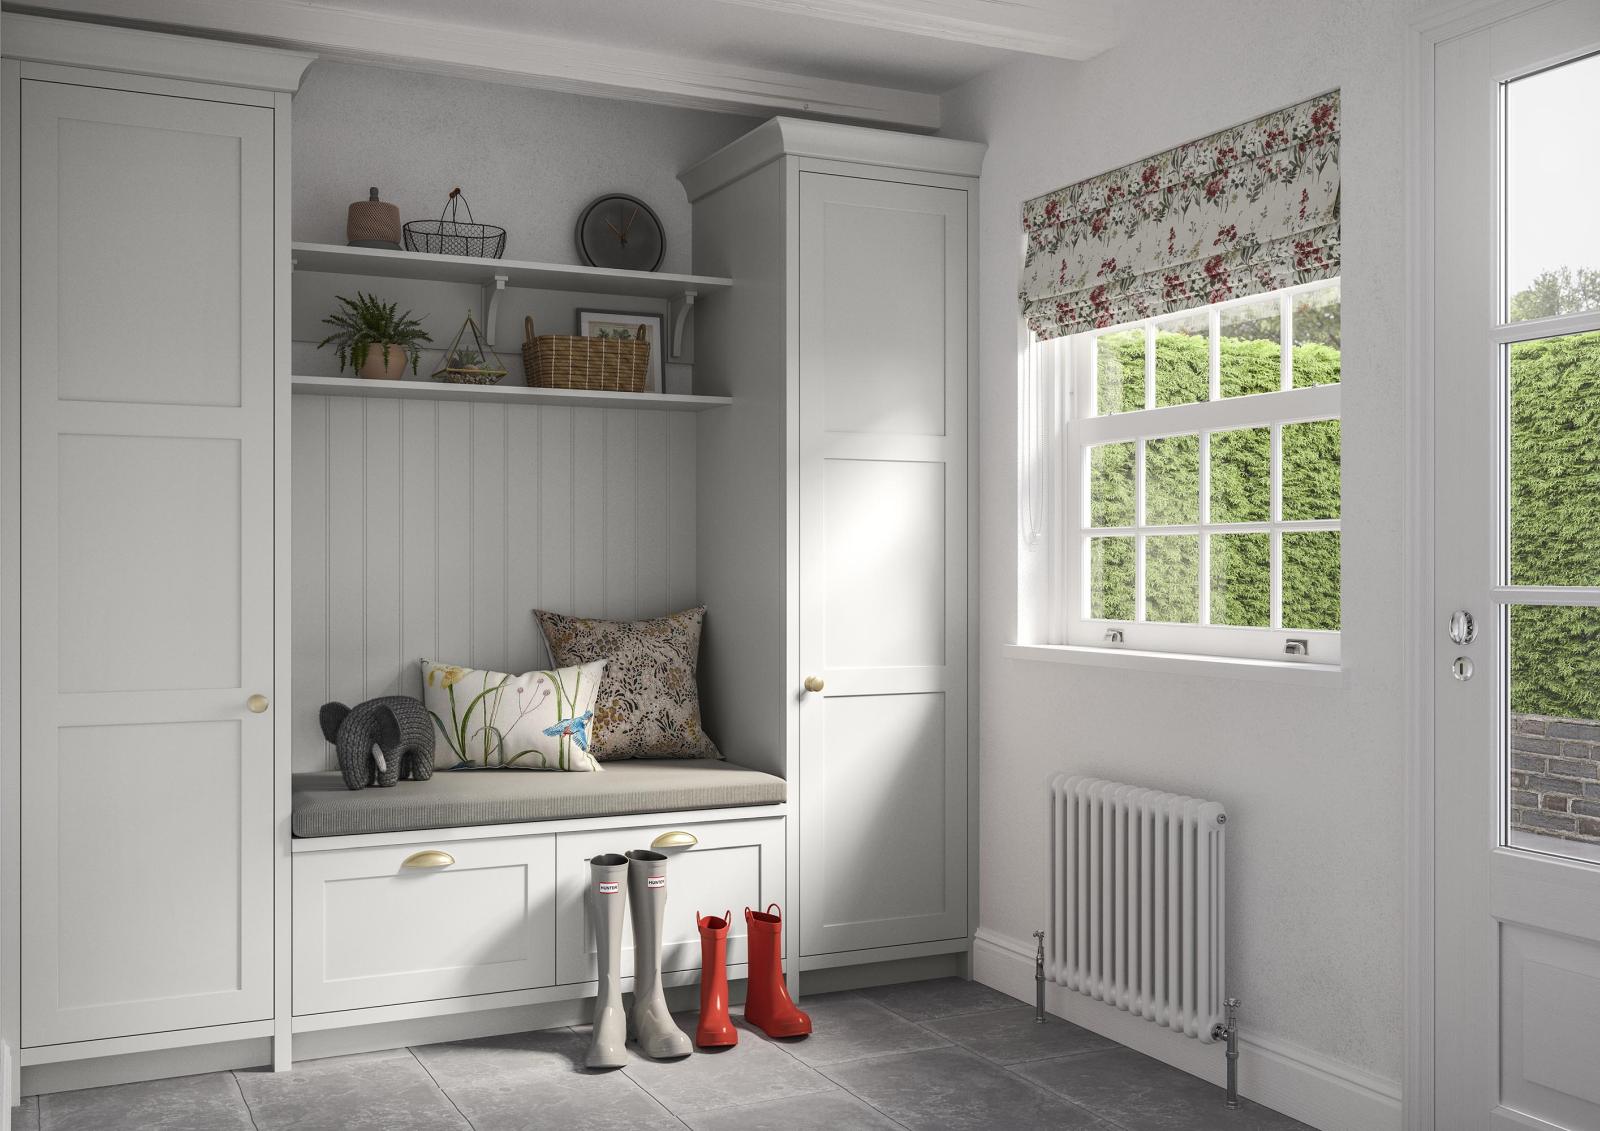 Smooth-finish, slim-frame, shaker-style kitchen painted vintage pink and light grey with adjoining utility storage room